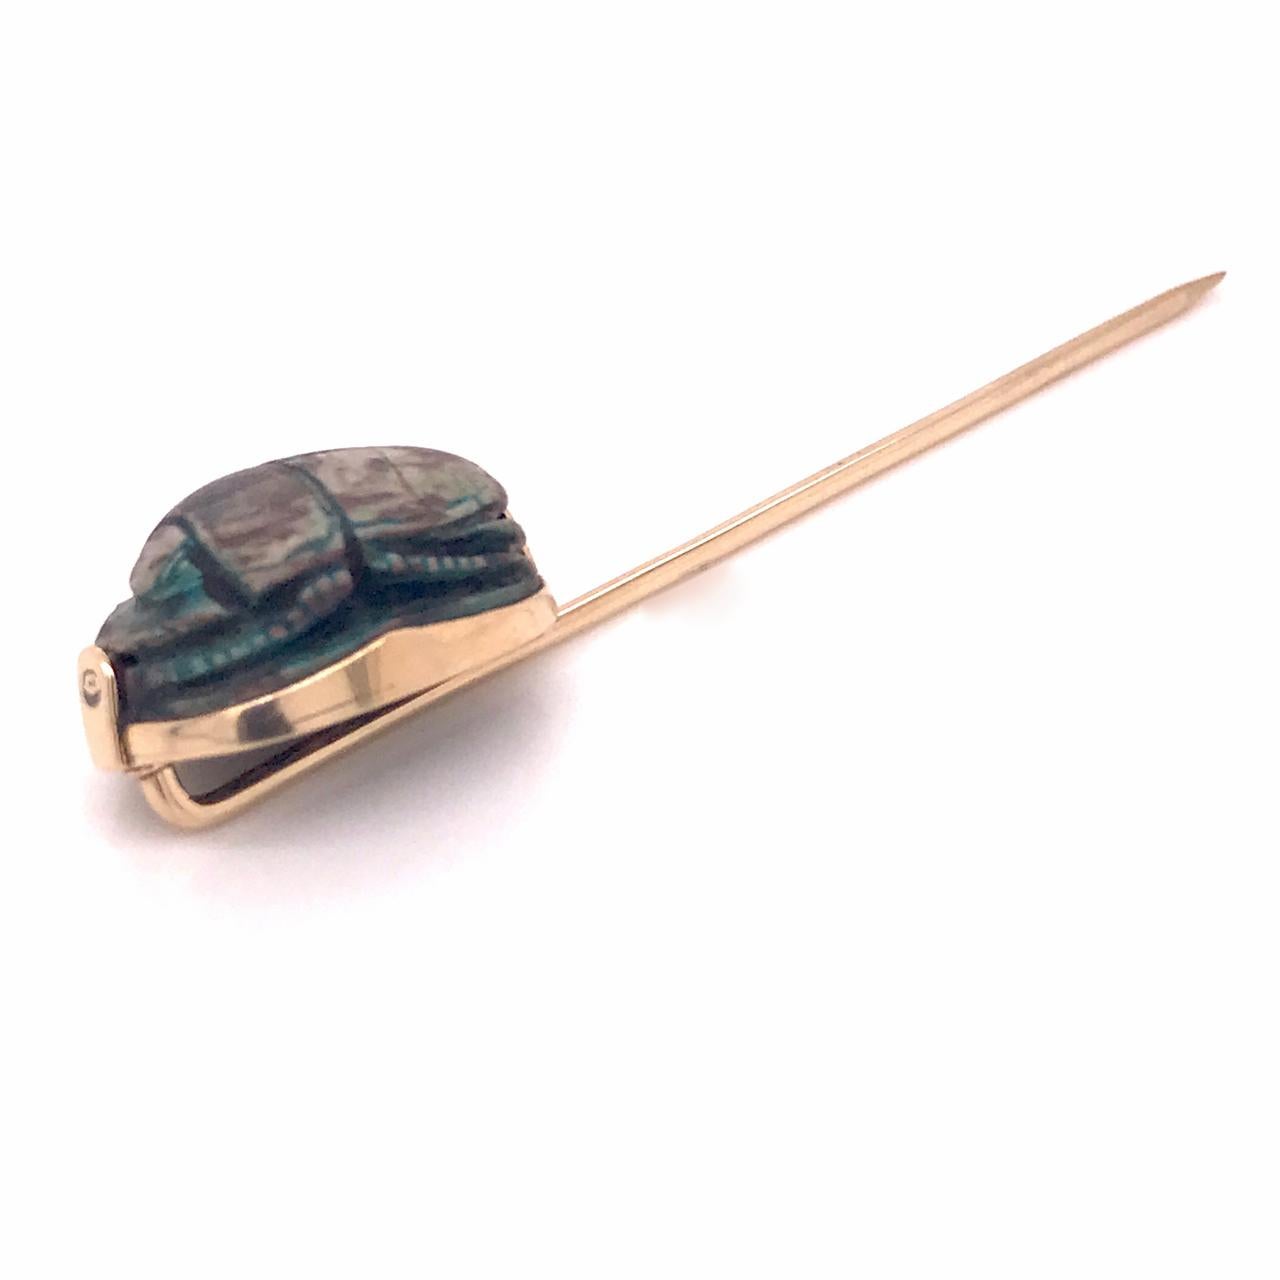 Antique Egyptian Revival Faience Scarab & 14 Karat Gold Stick Pin For Sale 2